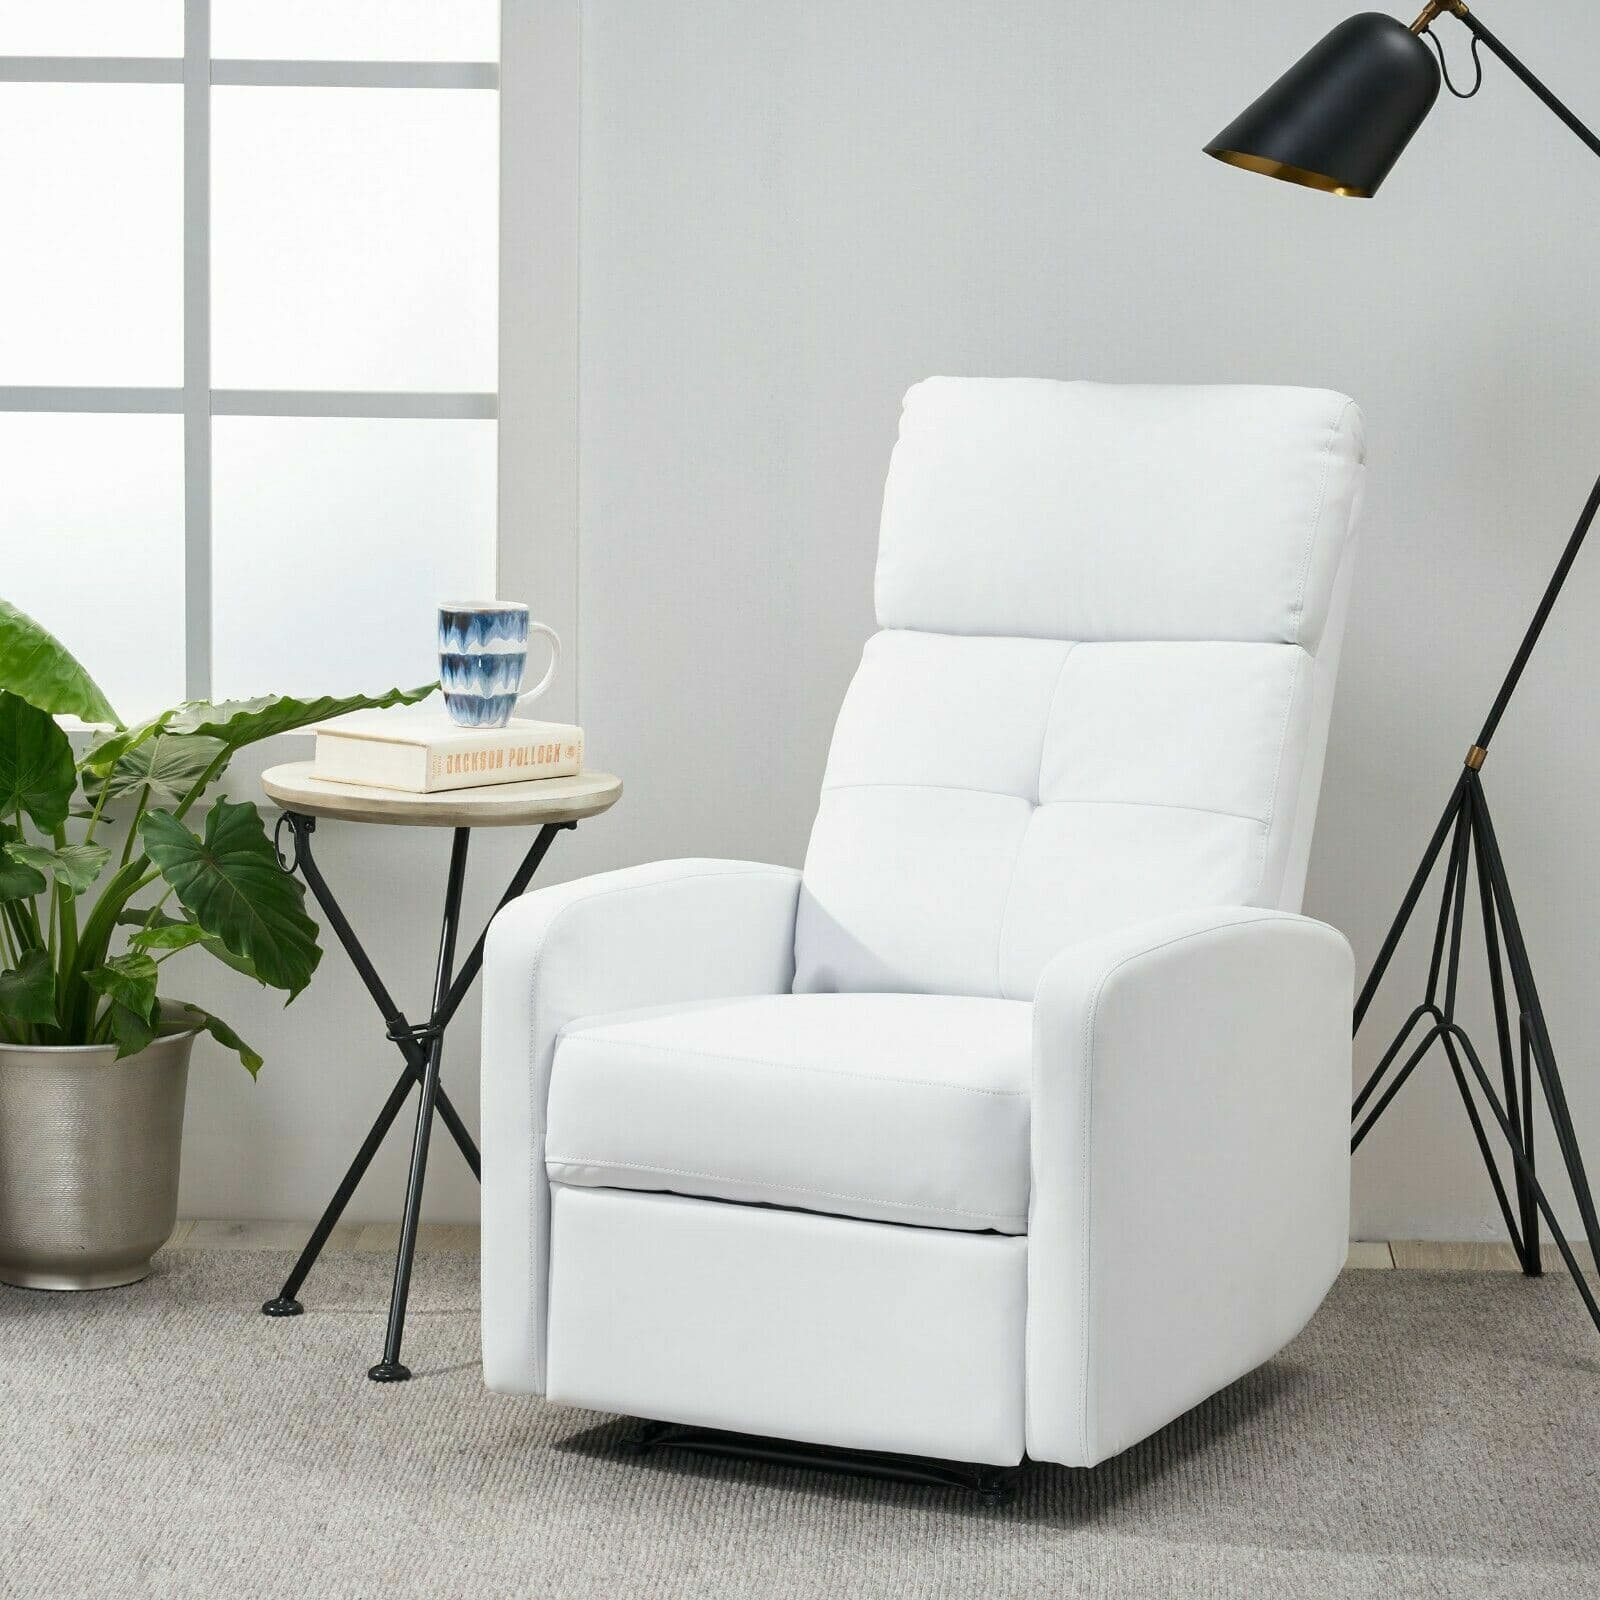 A white recliner chair in front of a plant.